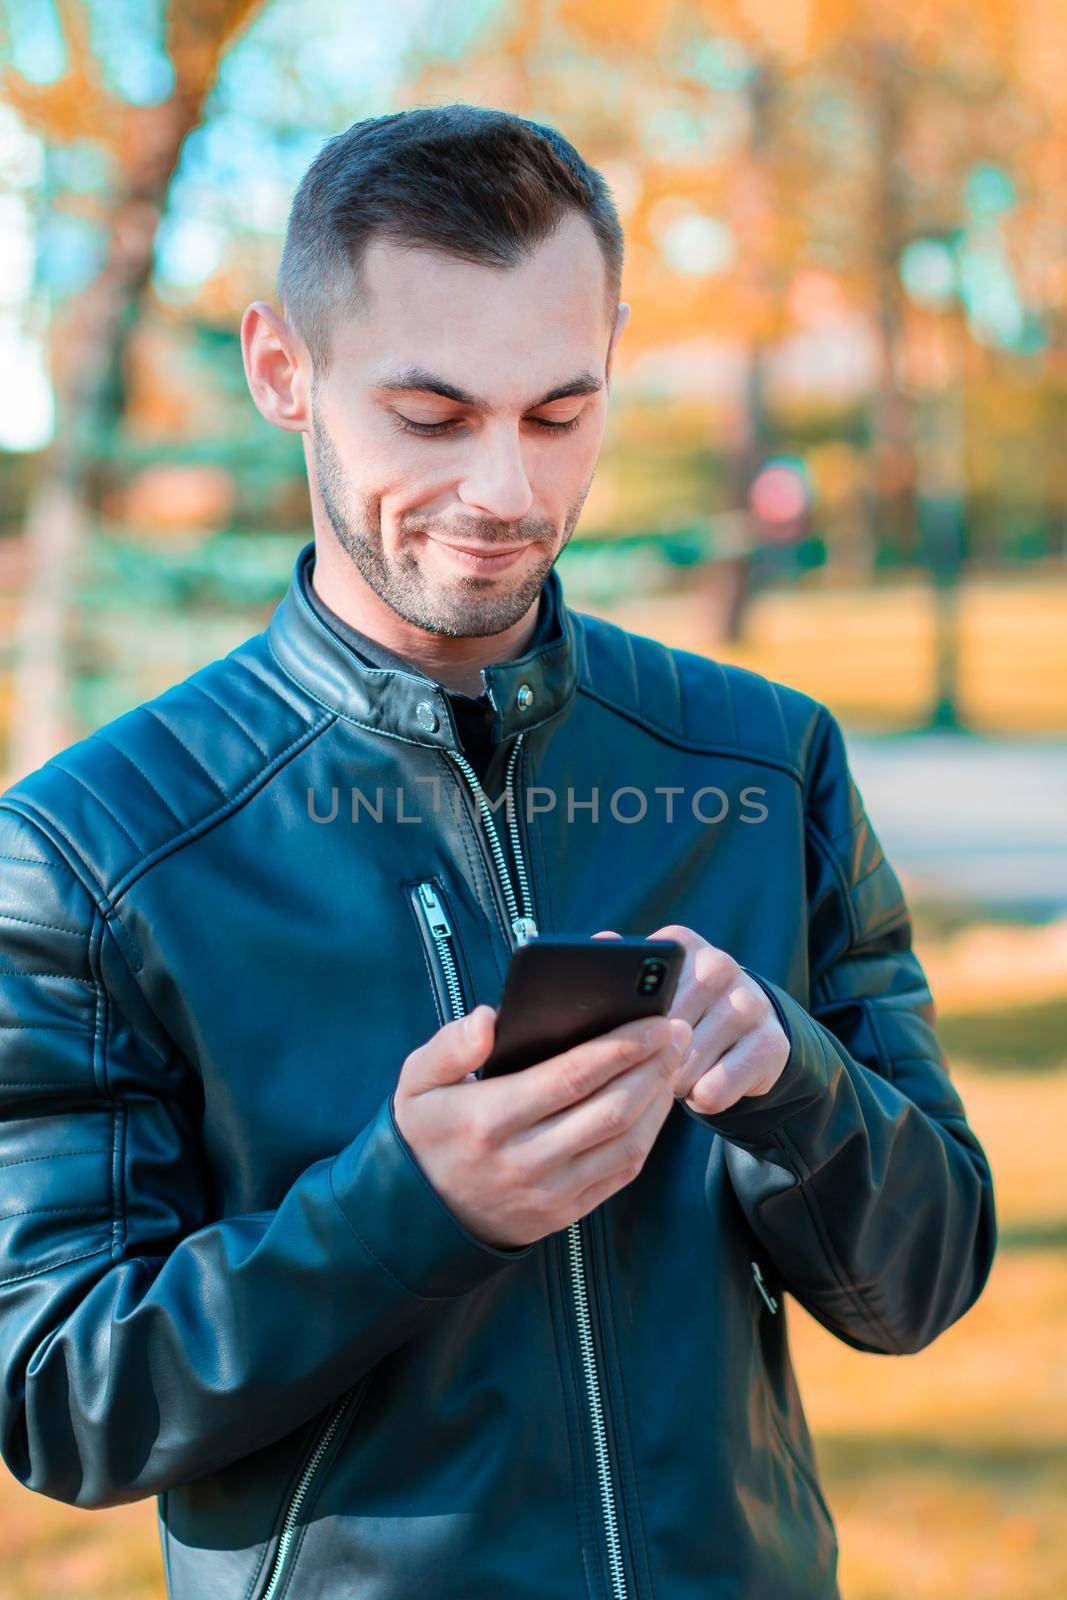 Youthful Guy Using Black Smartphone at the Beautiful Autumn Park. Handsome Young Man with Mobile Phone at Sunny Day - Medium Shot Portrait